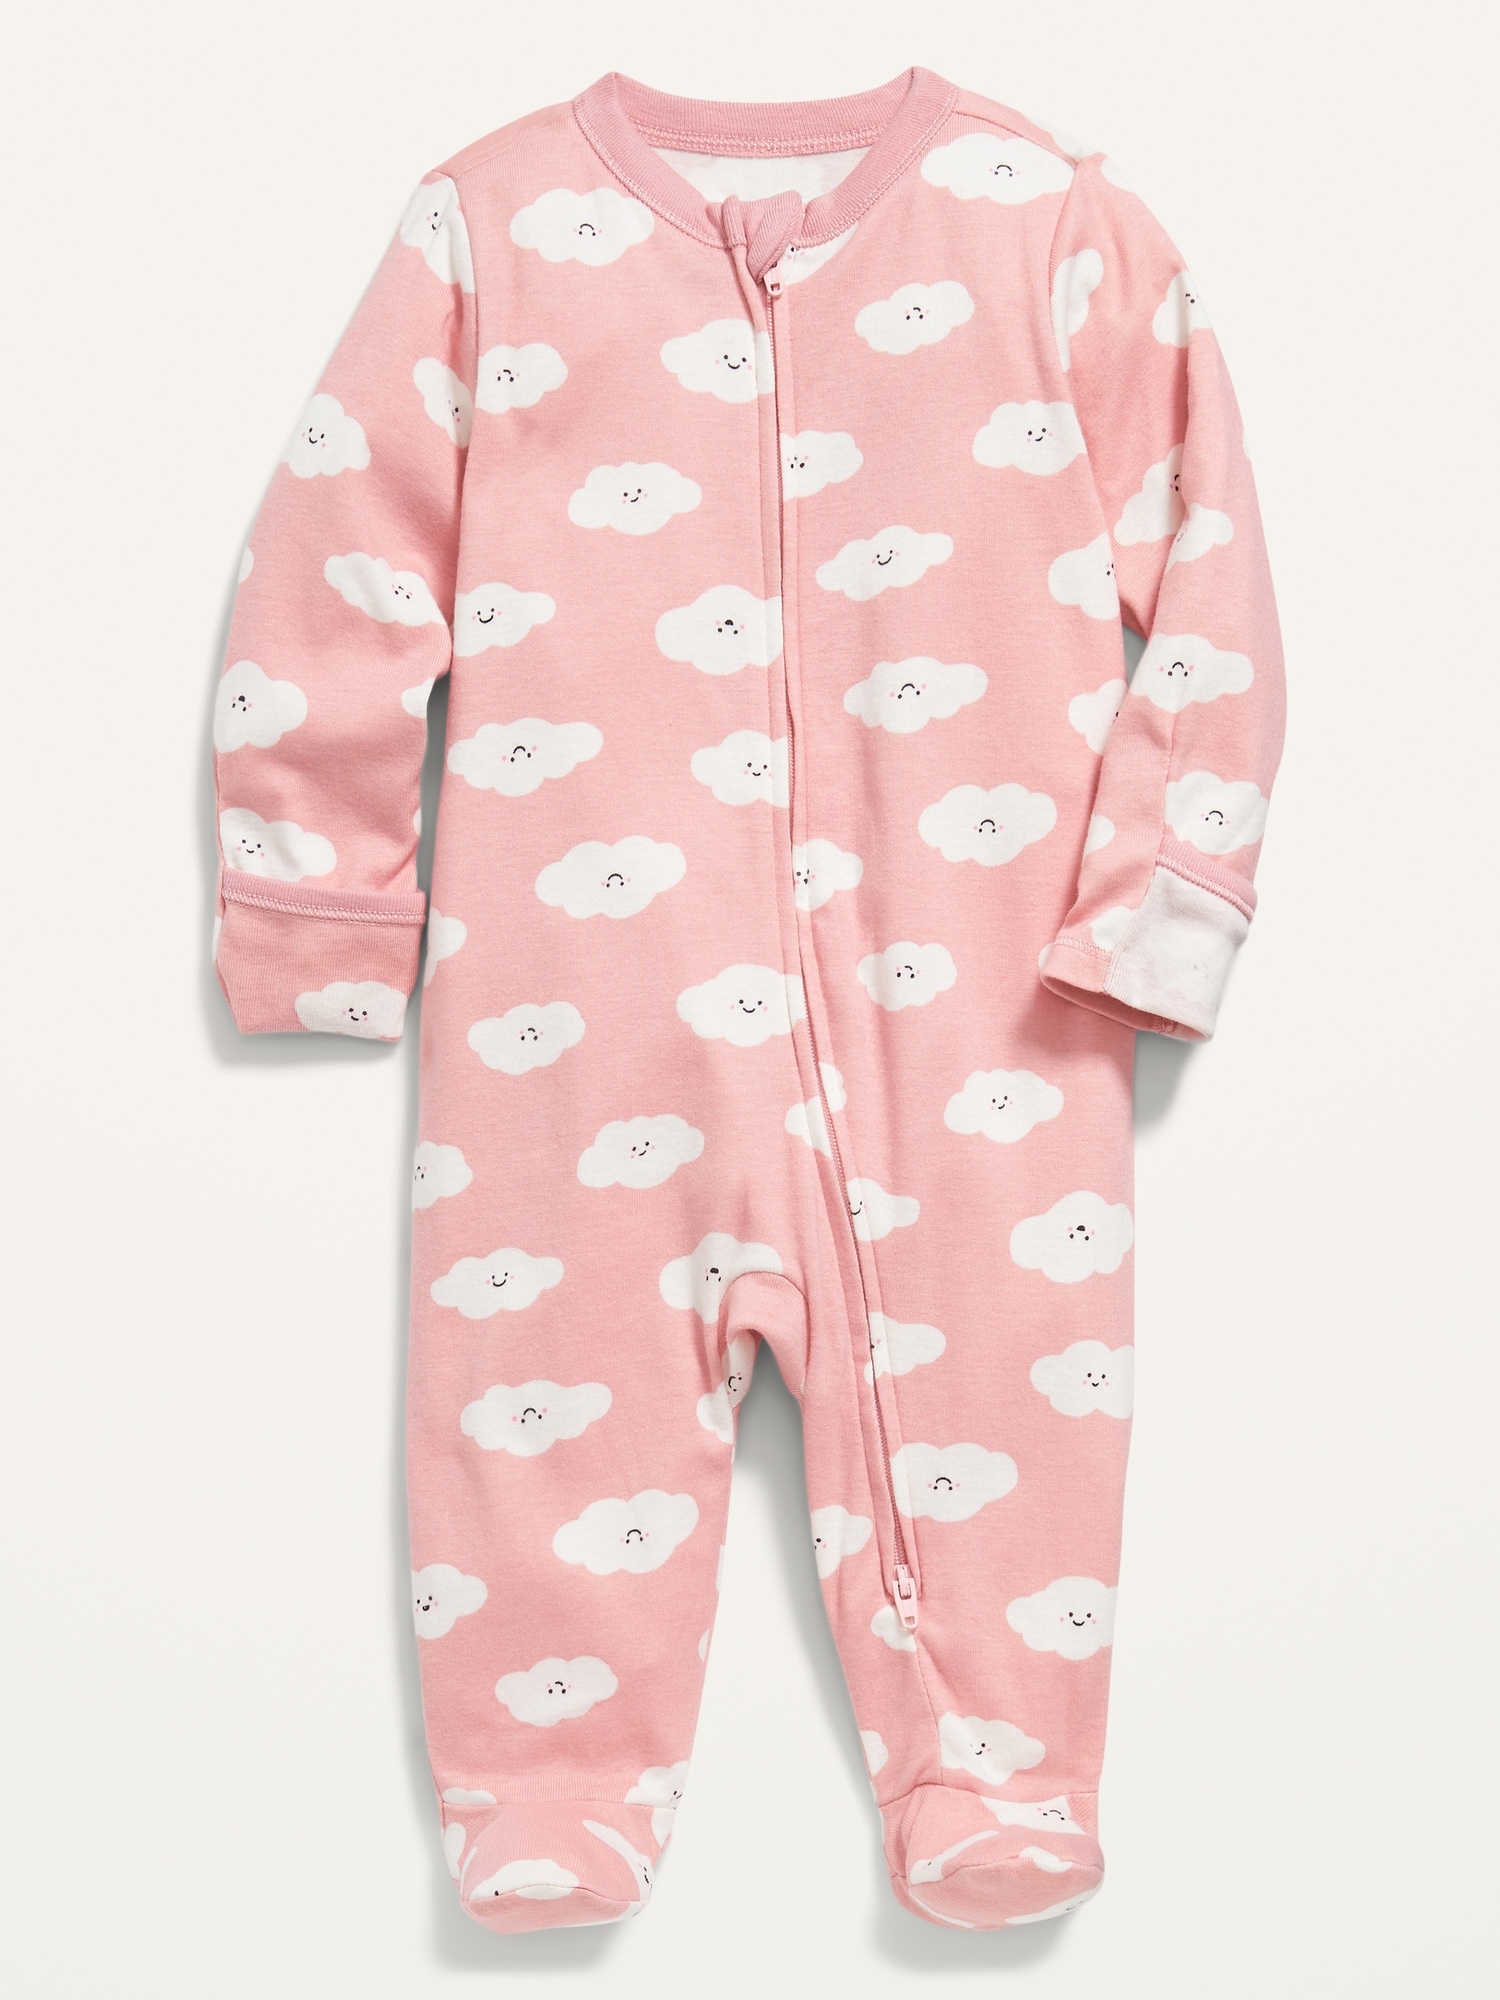 Old Navy Unisex Printed Sleep & Play Footed One-Piece for Baby pink. 1